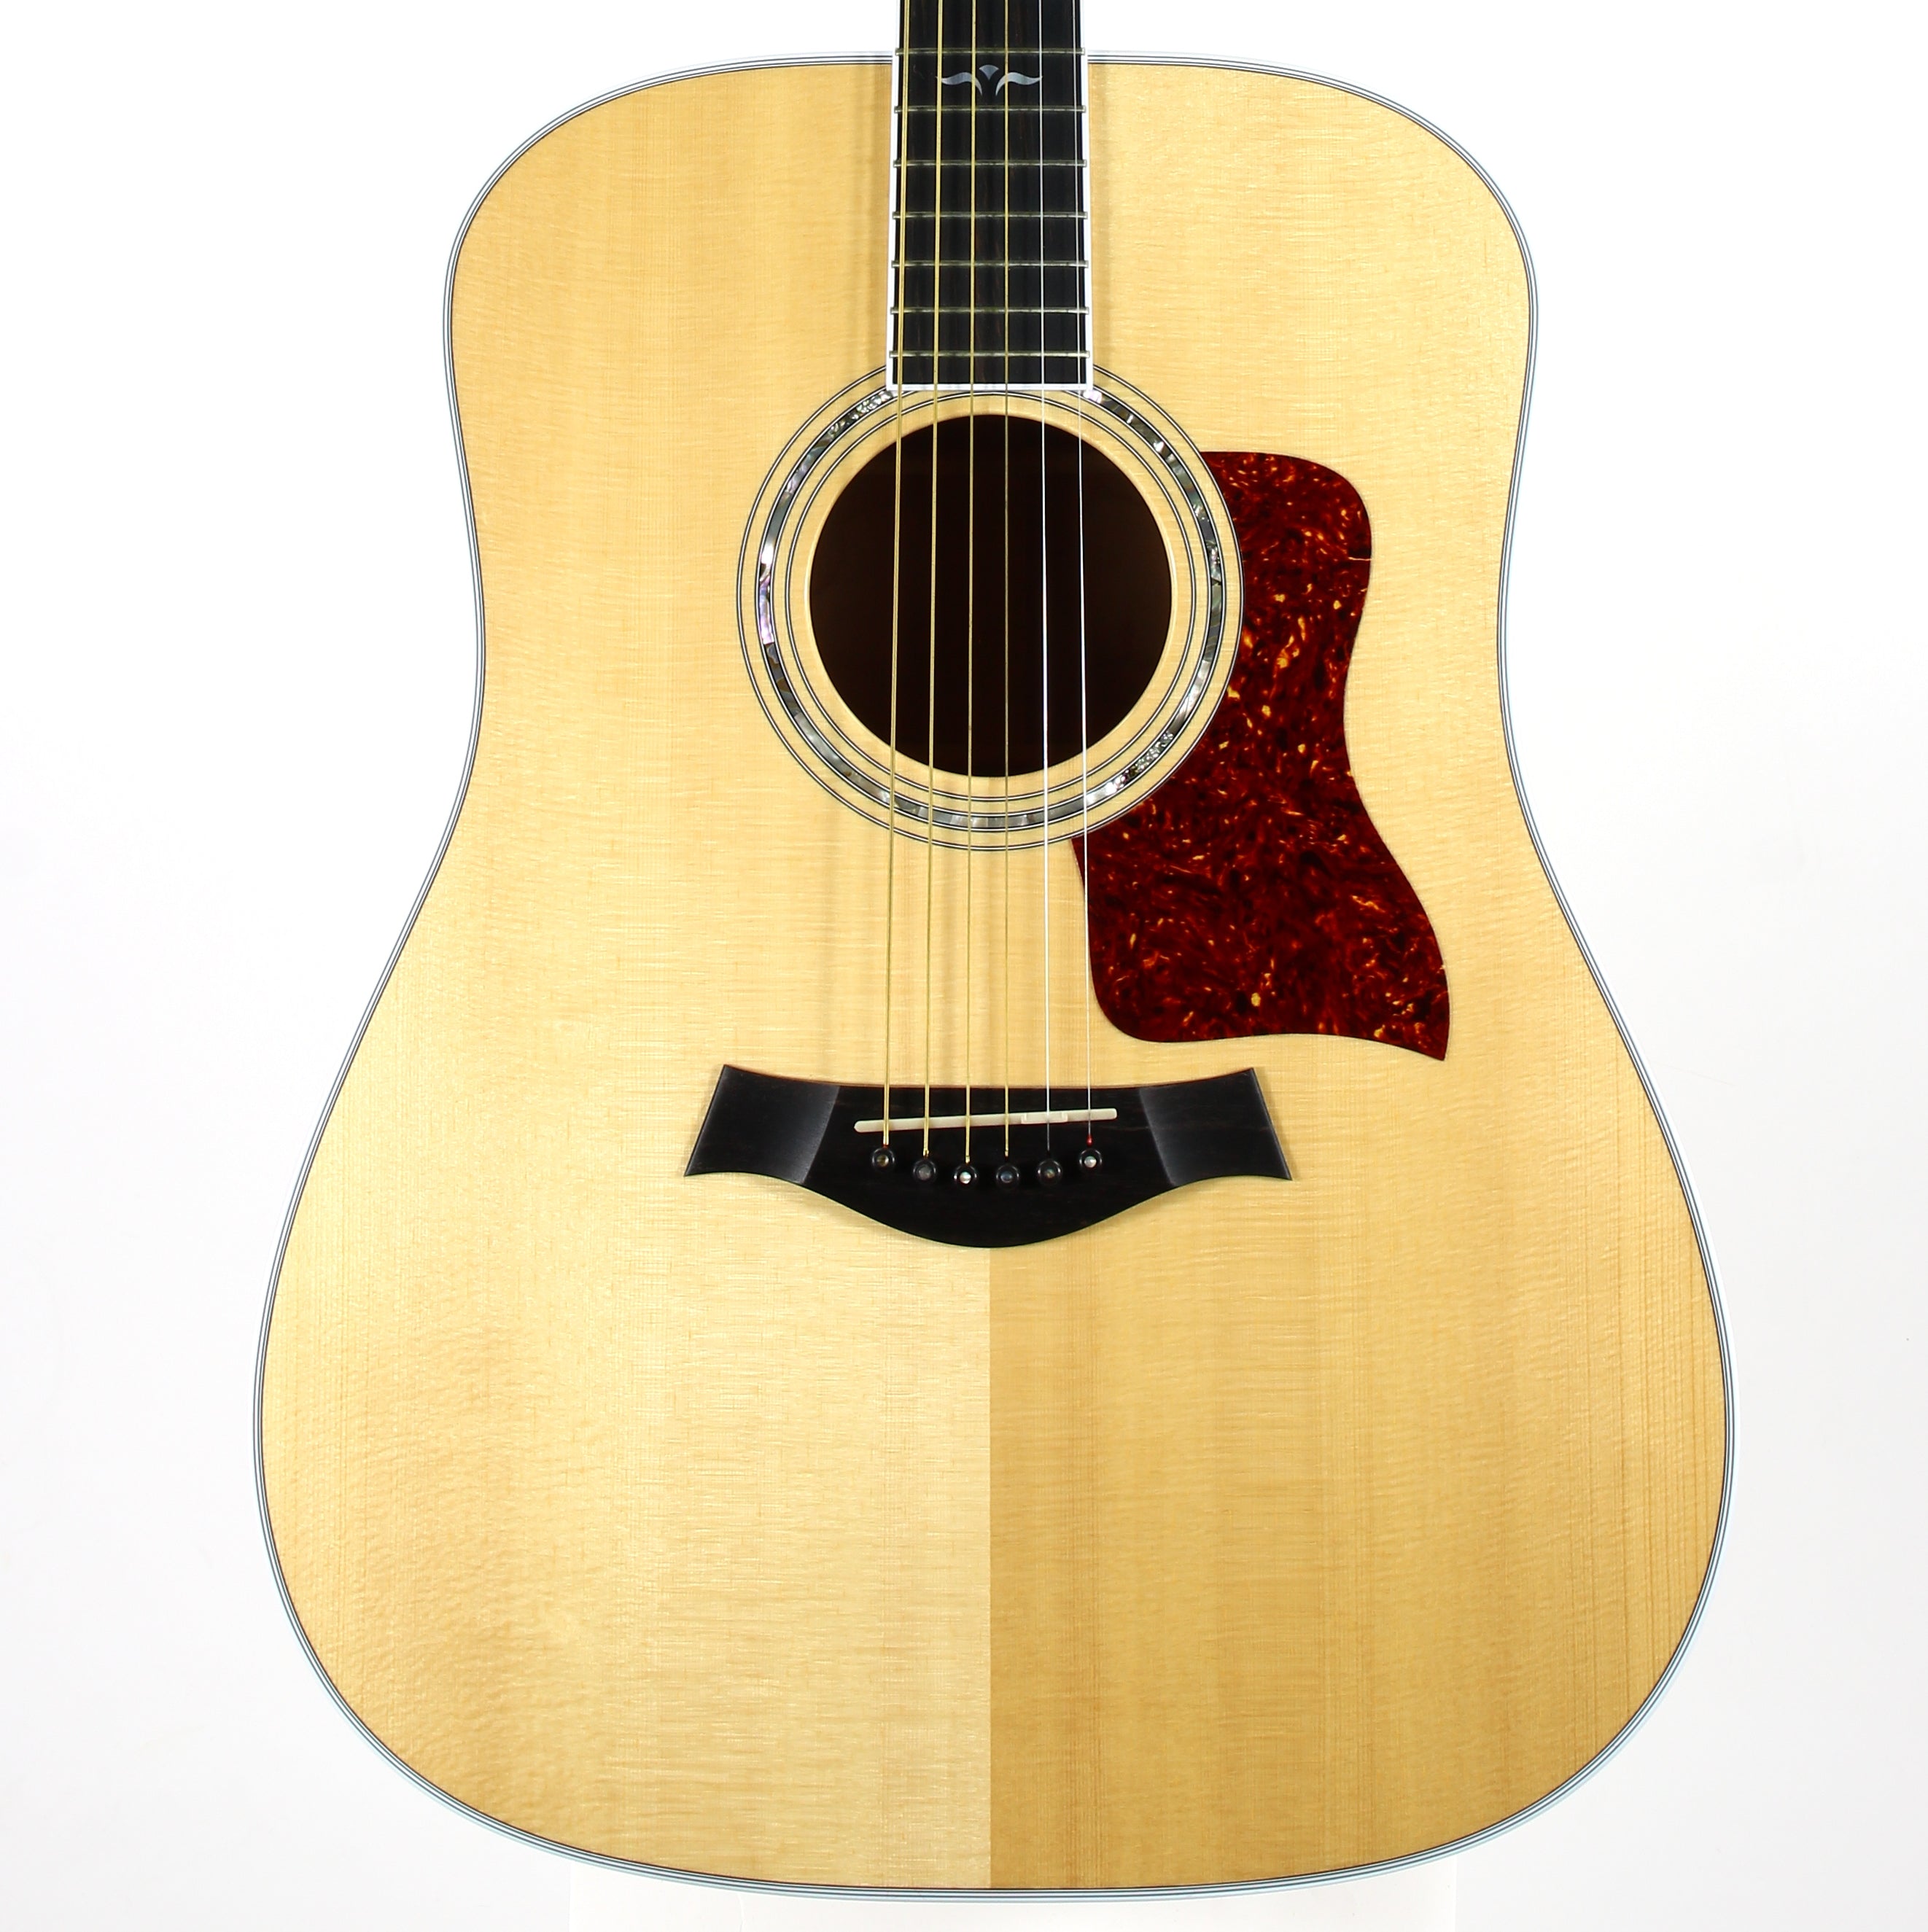 *SOLD*  UNPLAYED! 1993 Taylor 610 Dreadnought - High-Grade QUILTED MAPLE, Ebony Fittings, Golden Era 1990's! 610e 610ce